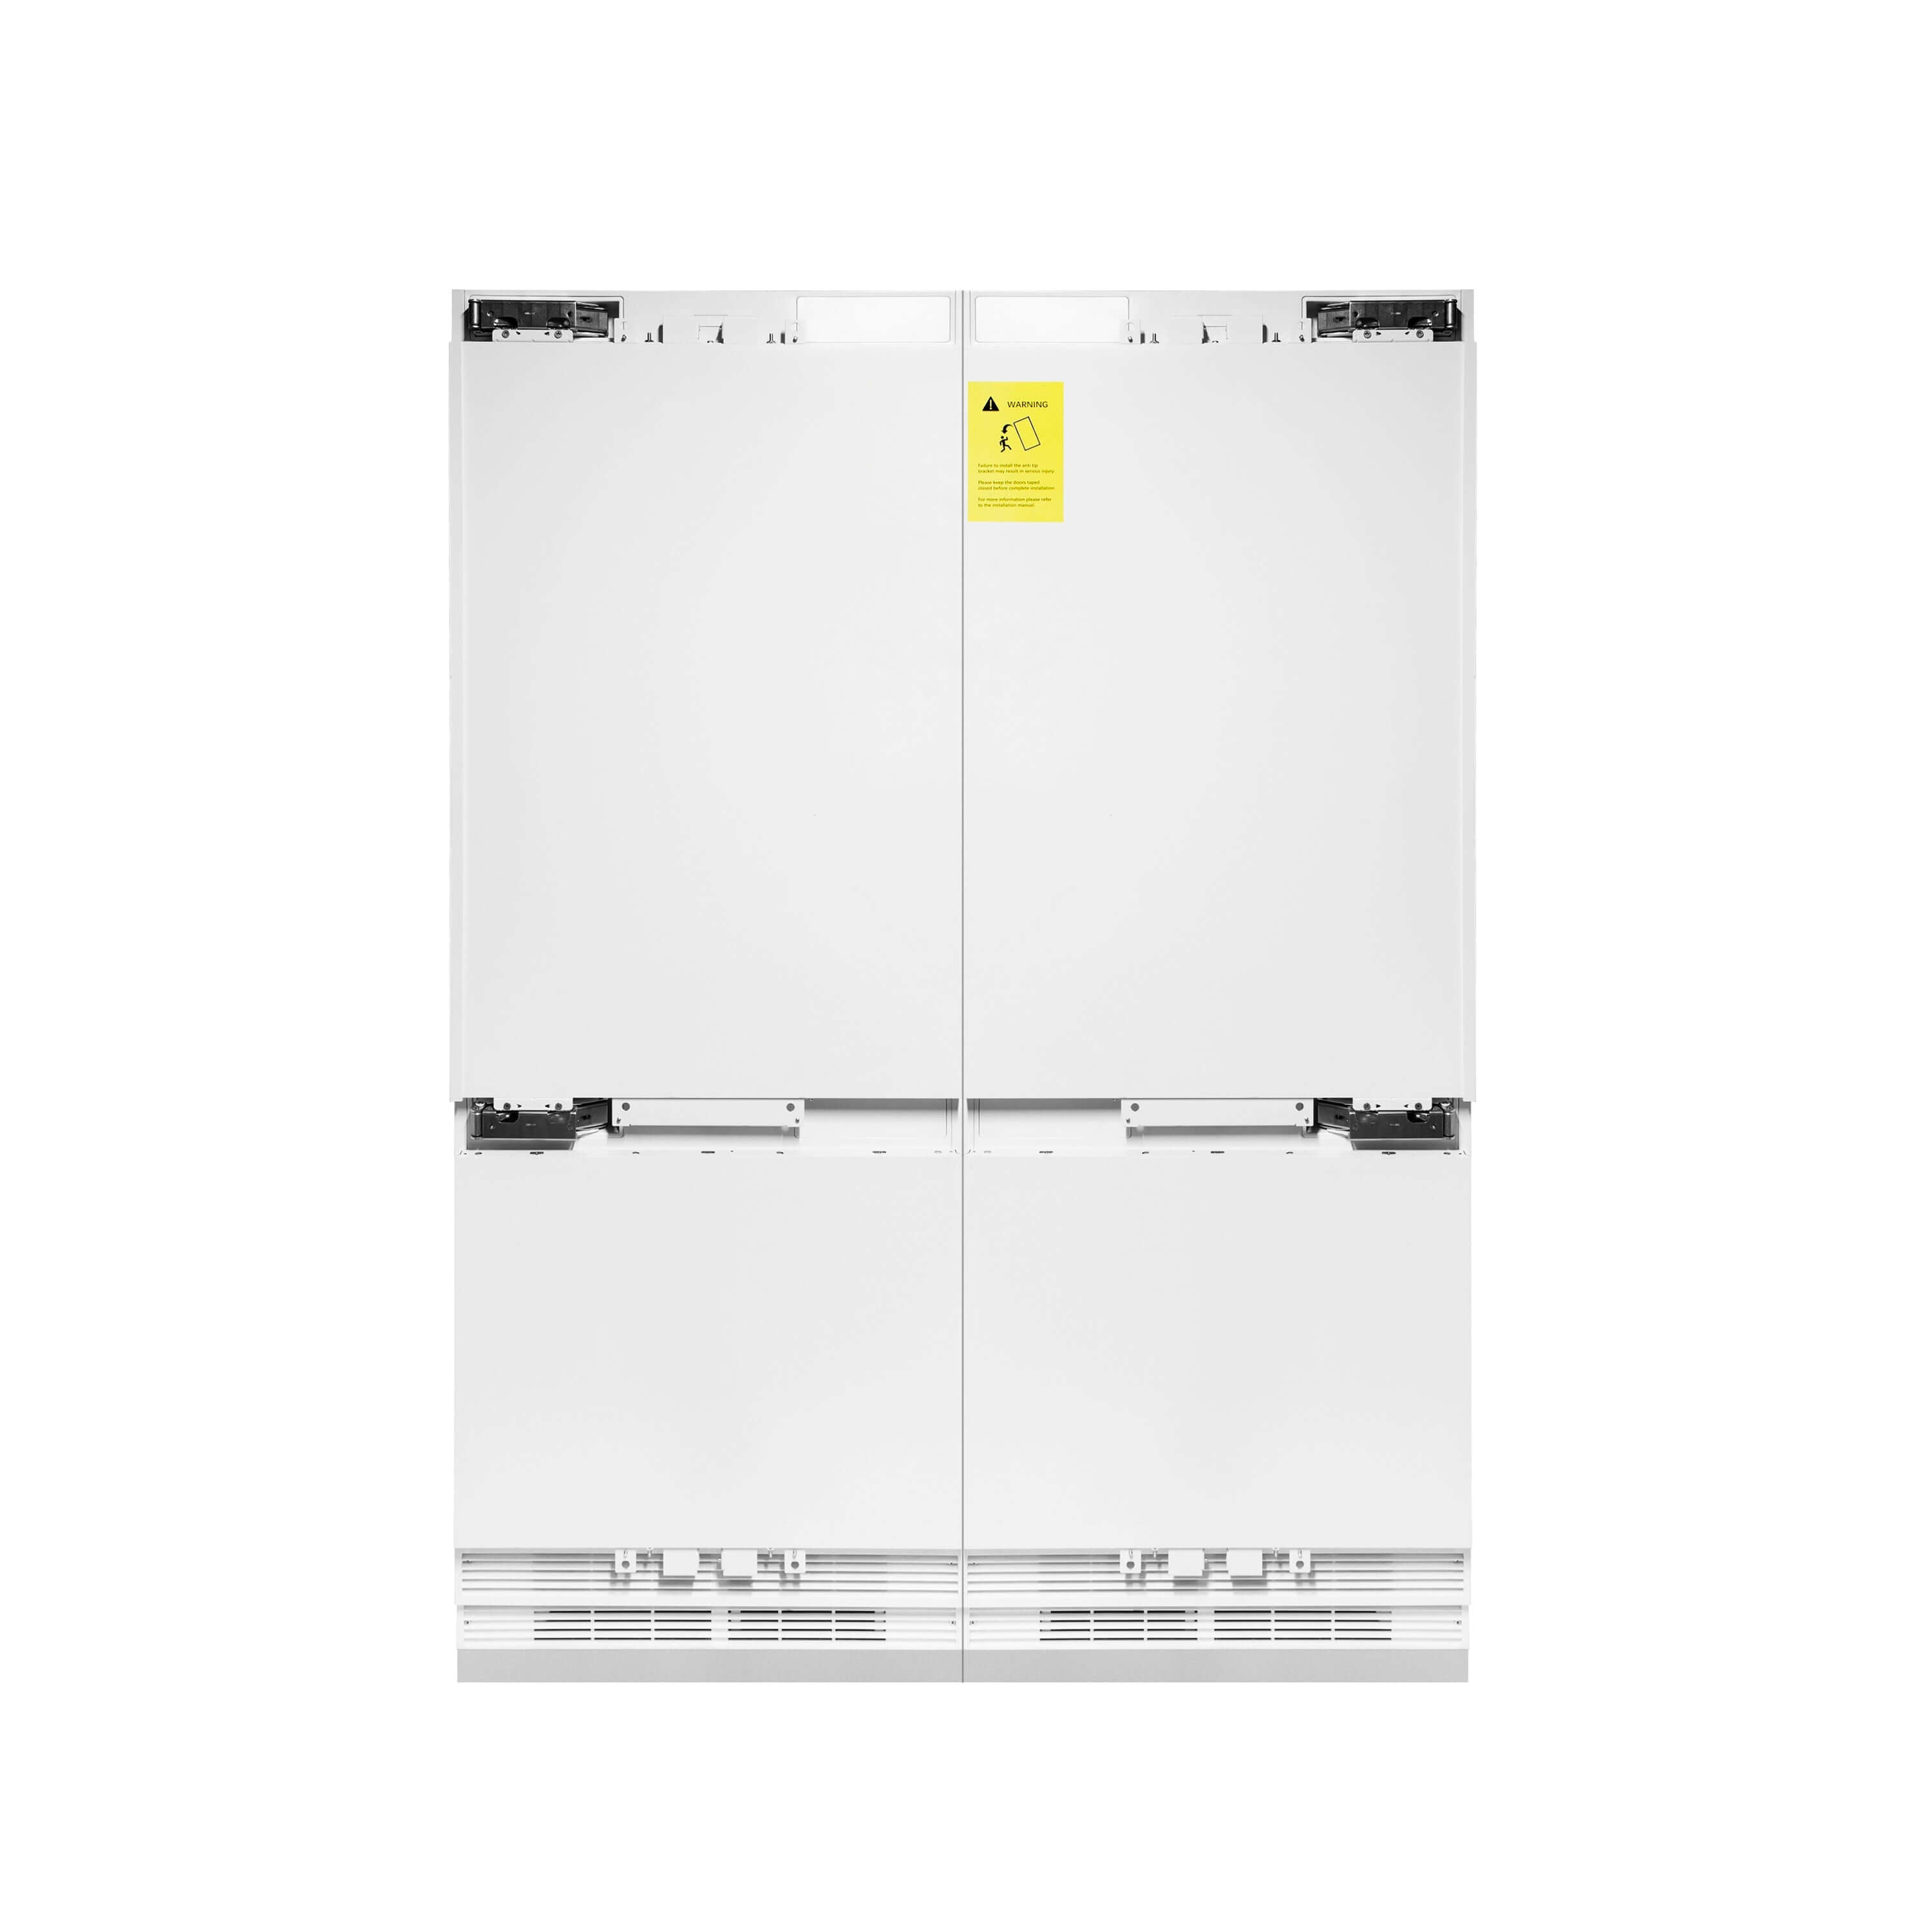 ZLINE 60 in. Panel Ready French Door Refrigerator (RBIV-60) without panels